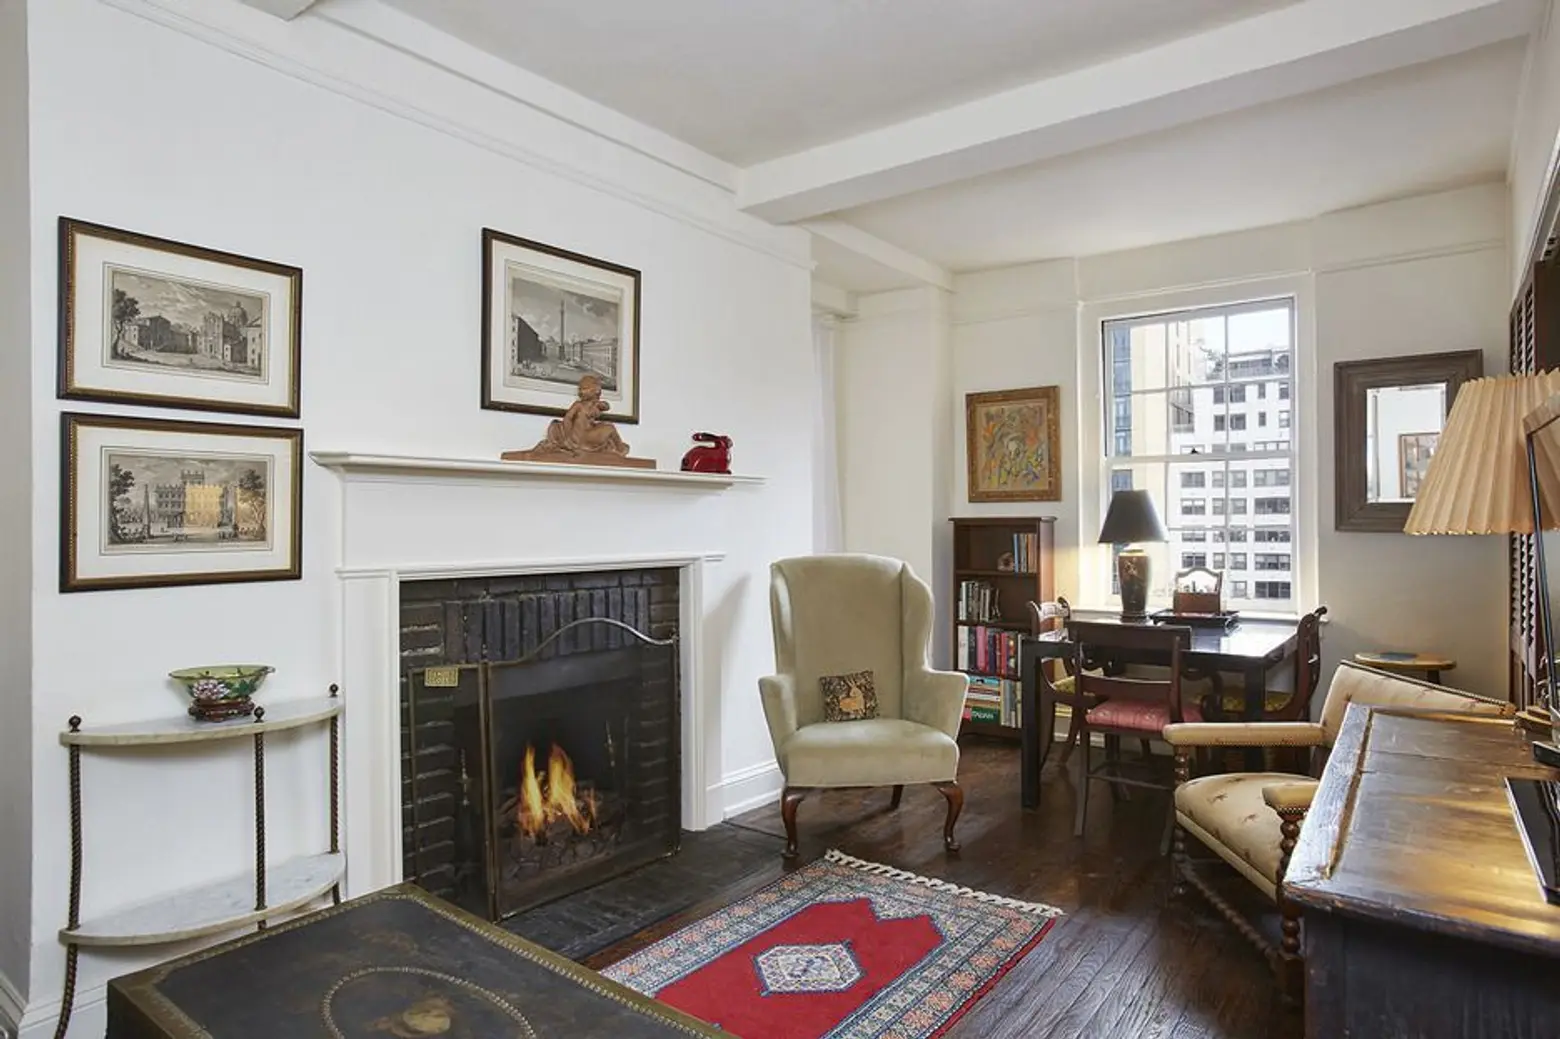 Curl up by the fire in this cozy East Side one-bedroom for only $495K